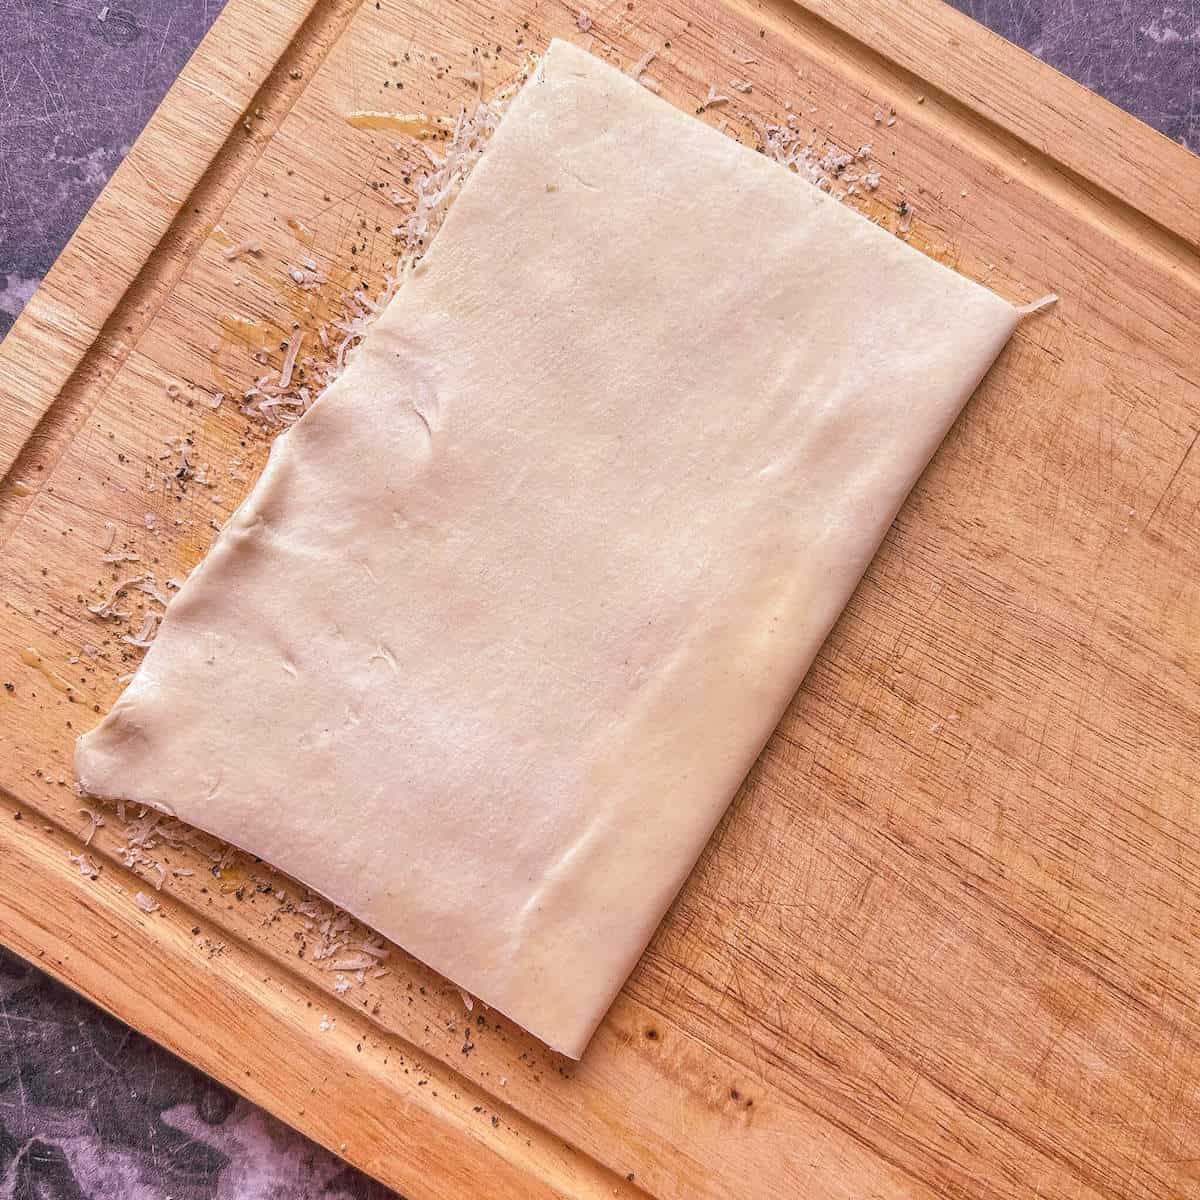 A folded piece of puff pastry with cheese and pepper inside.